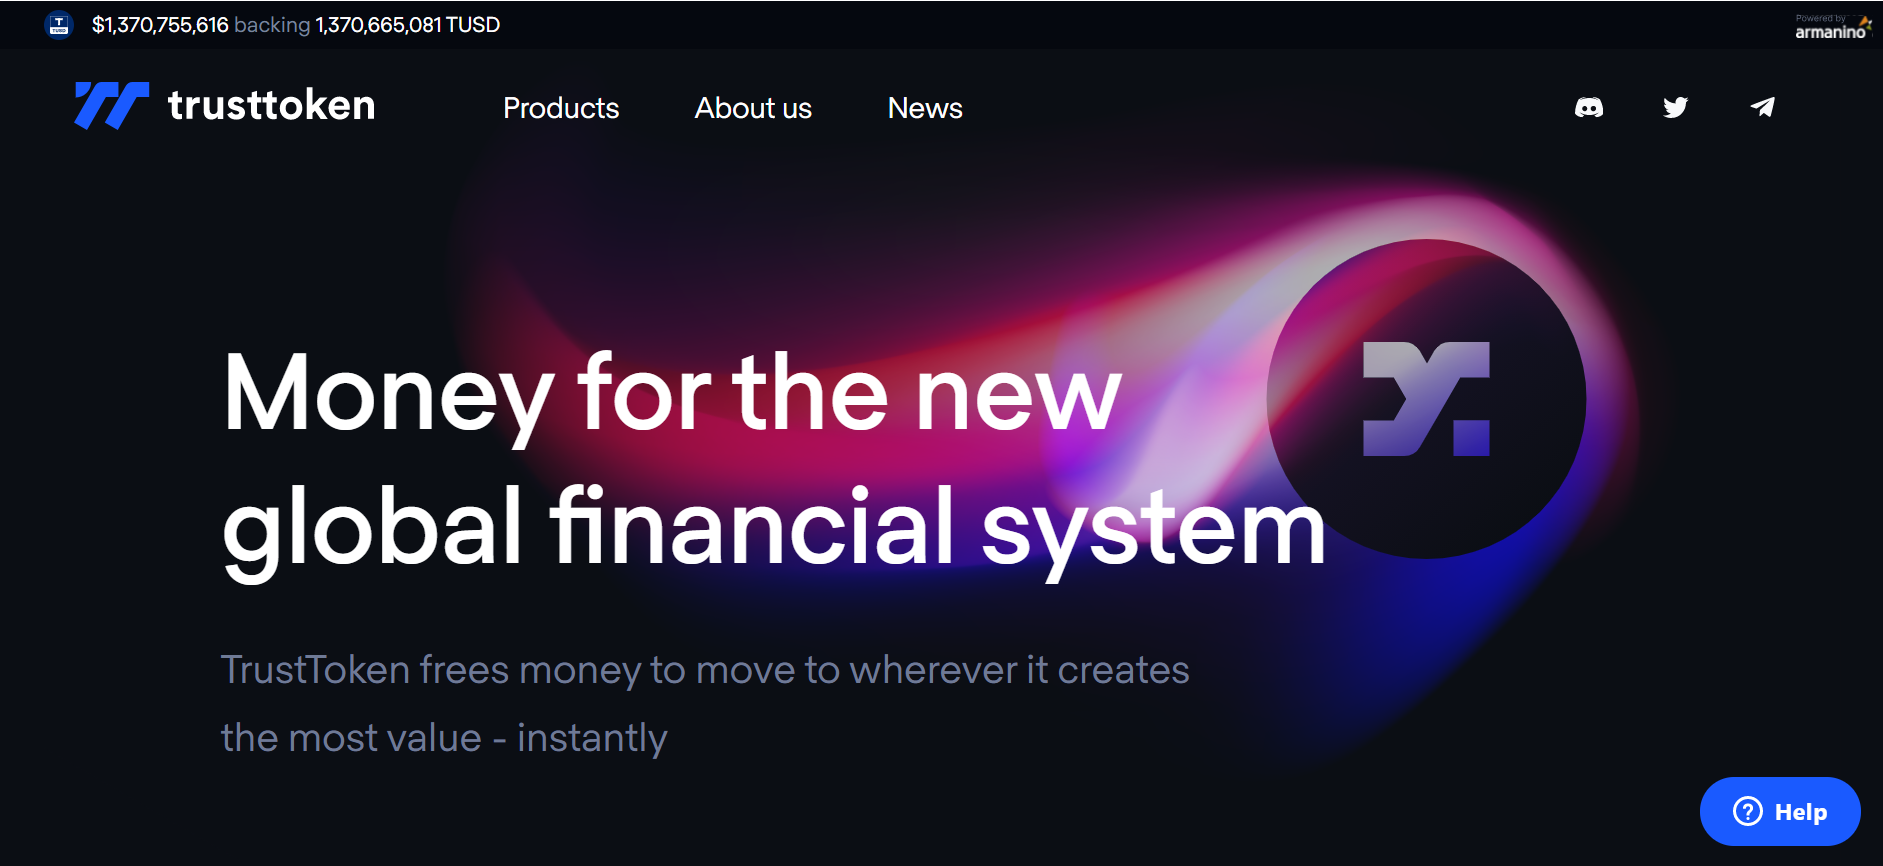 Screen capture of TrustToken's TUSD stablecoin homepage